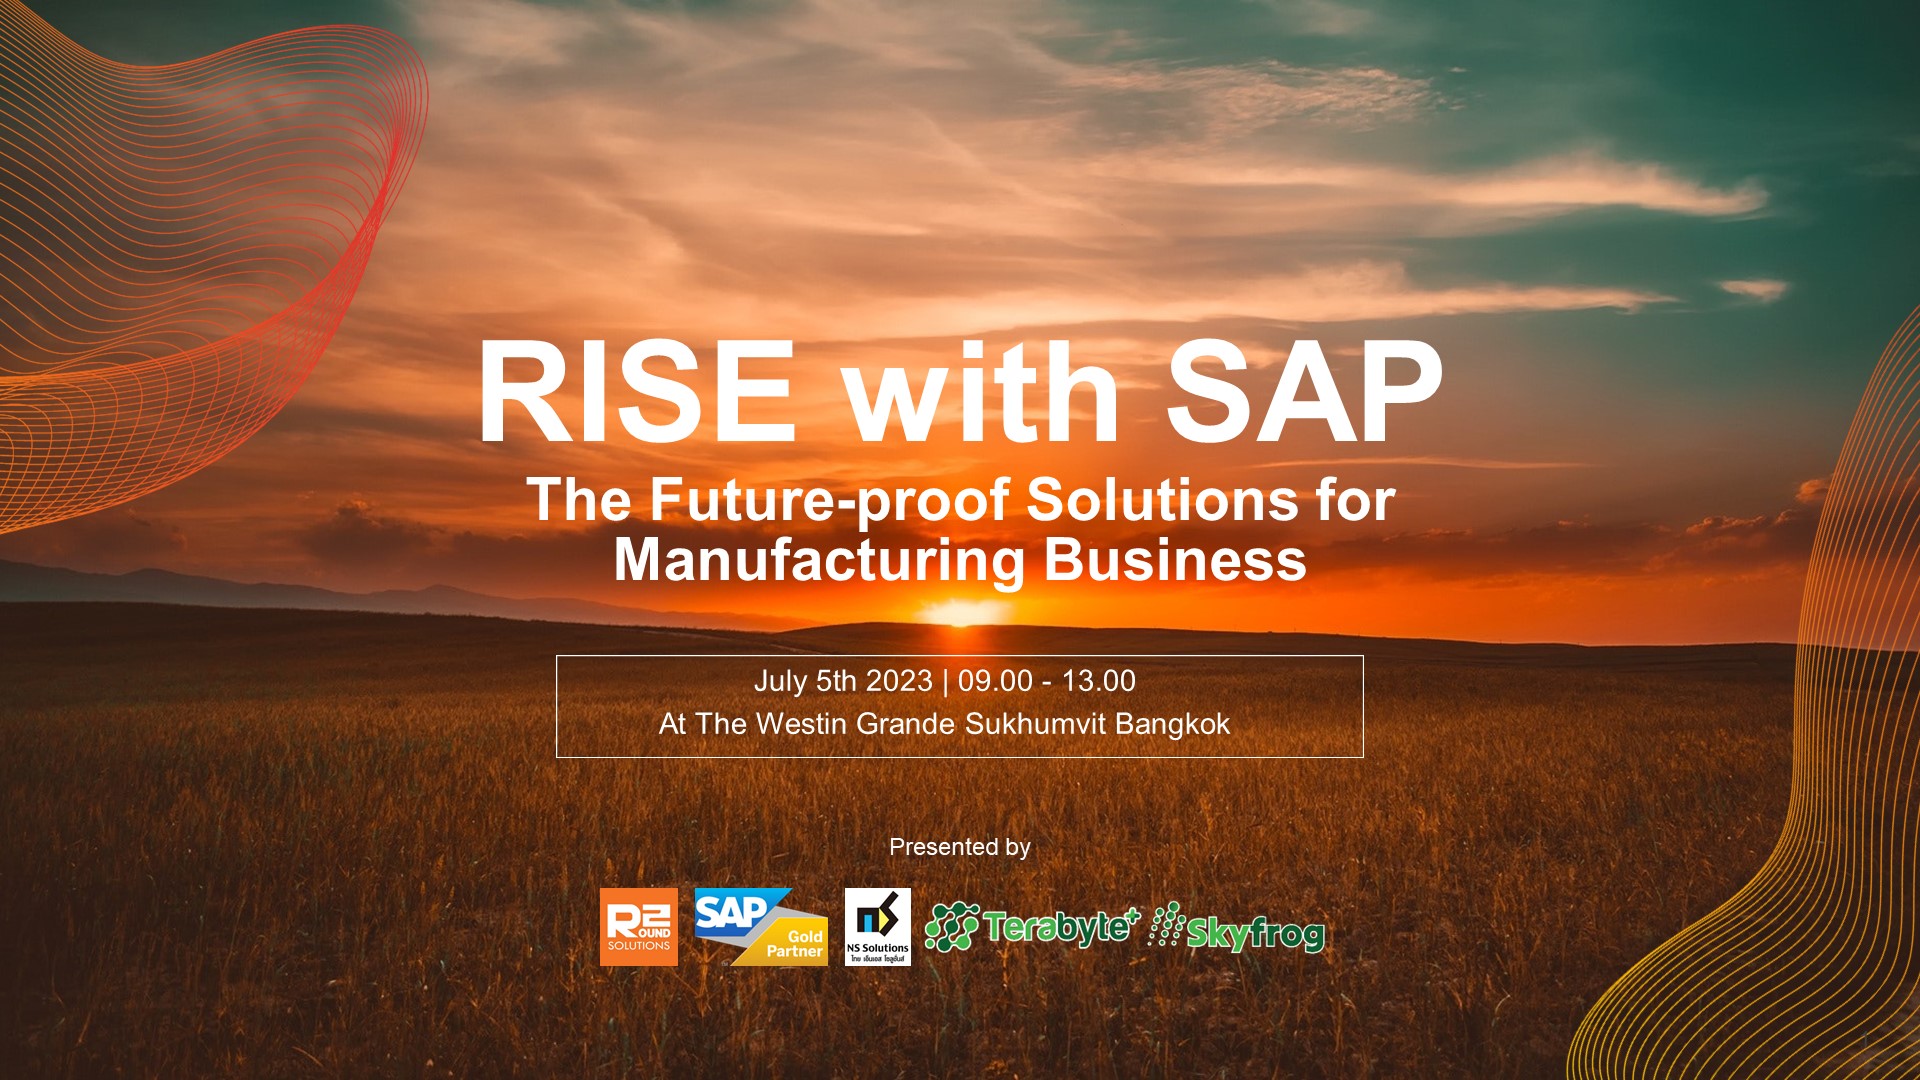 You are currently viewing RISE with SAP, The Future-proof Solutions for Manufacturing Business